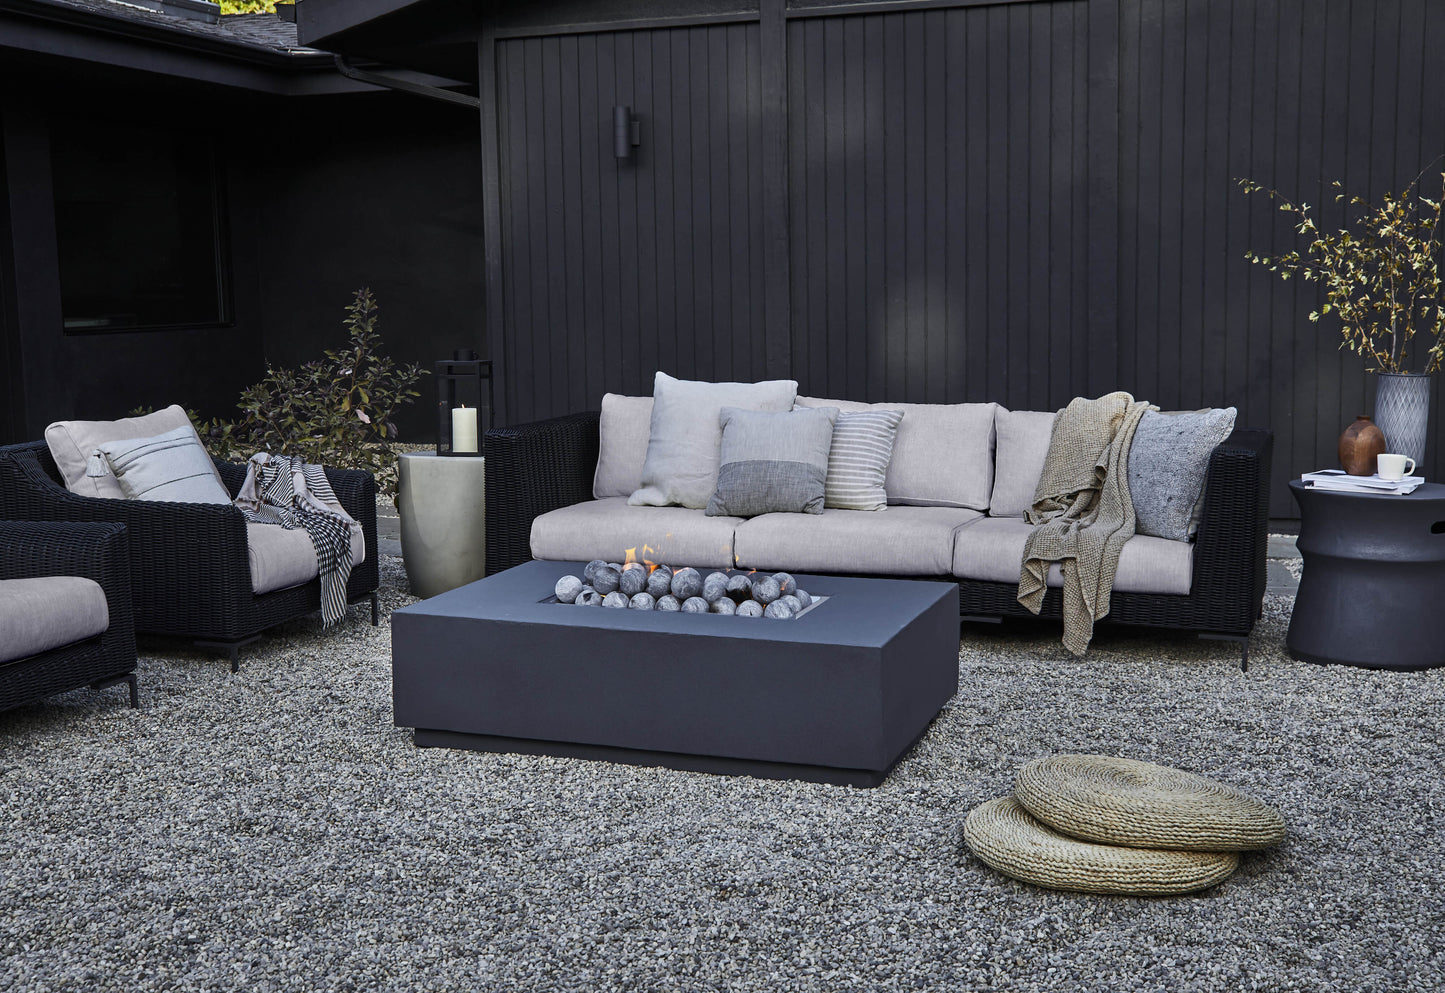 Live Outer 29" Black Wicker Outdoor Ottoman With Sandstone Gray Cushion